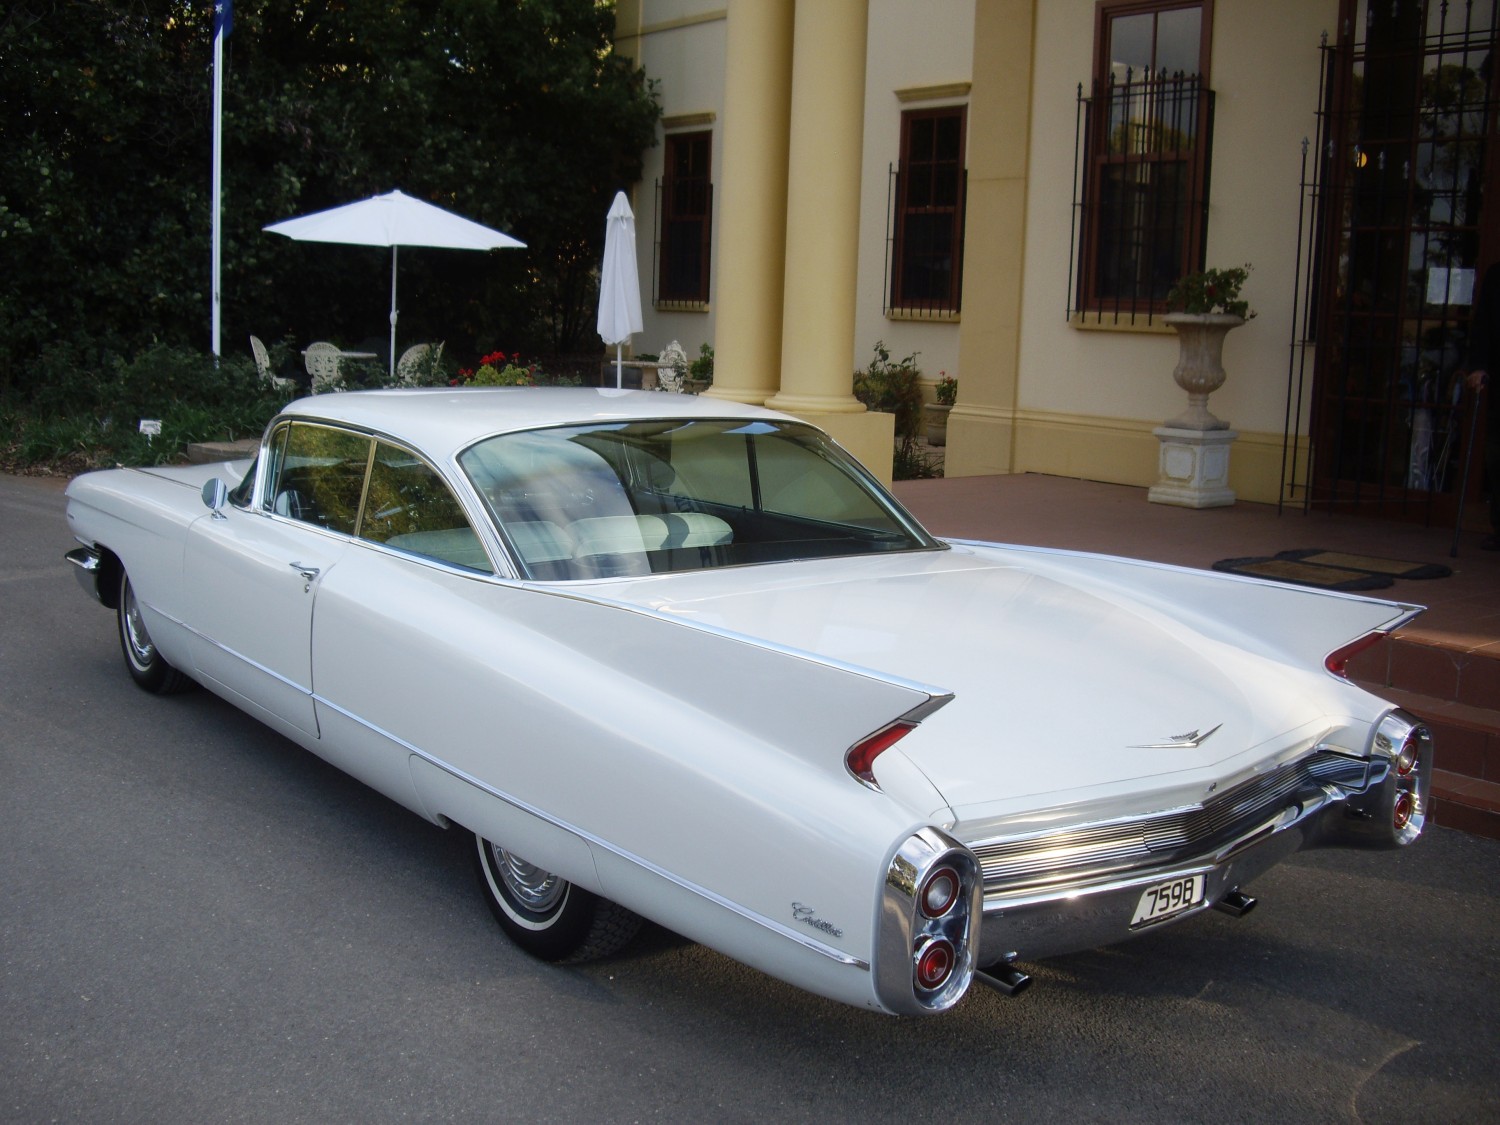 1960 Cadillac Coupe Series 62 - 1960Cadillac - Shannons Club